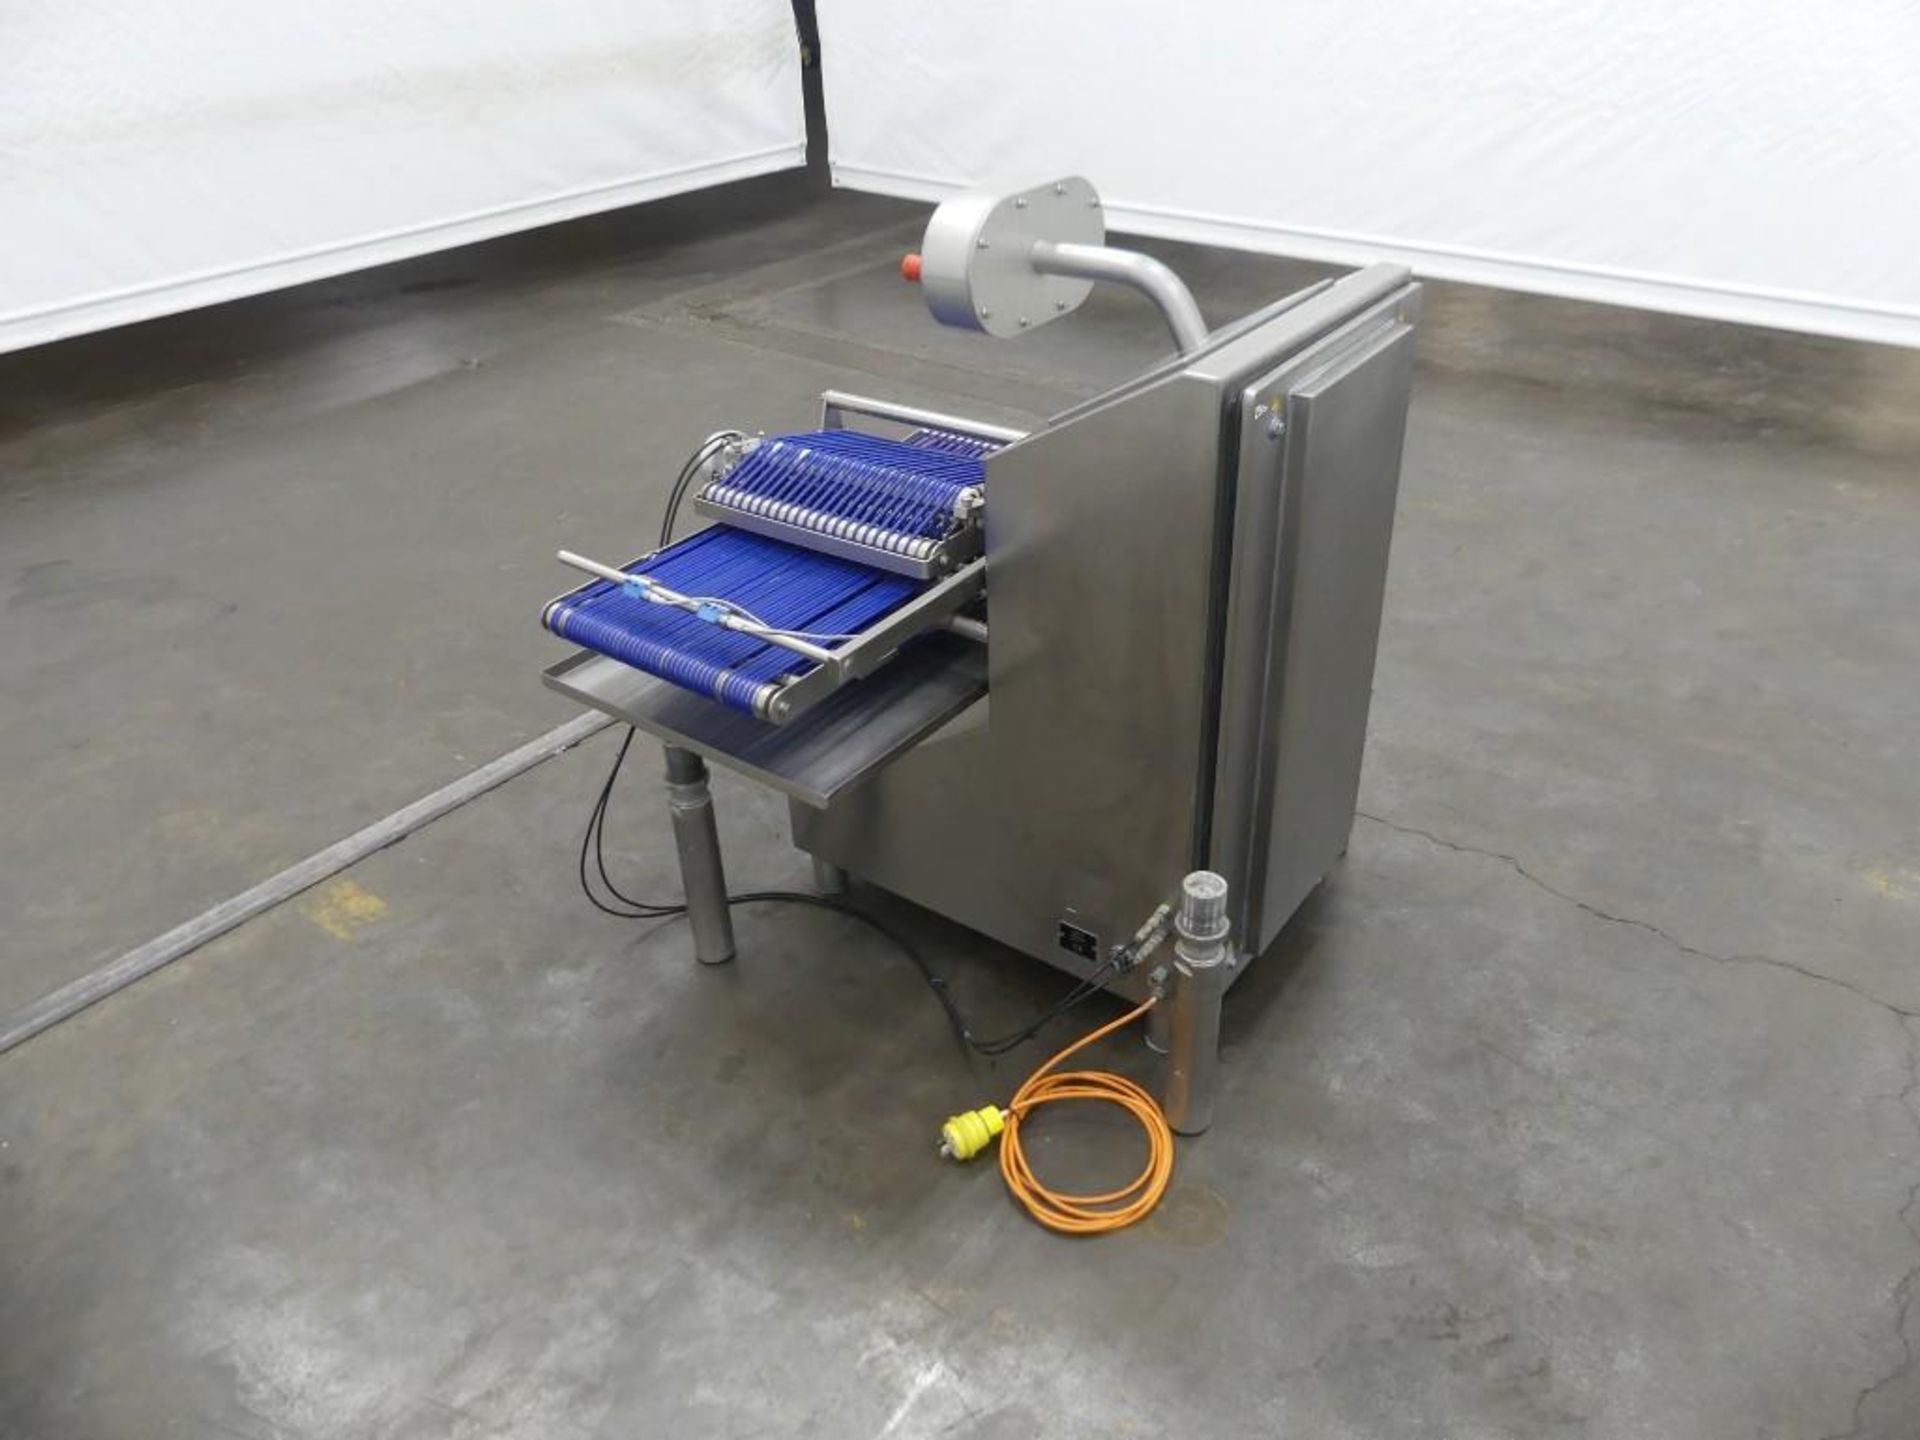 Tech for Food Roll it Stainless Steel Food Roller - Image 3 of 41